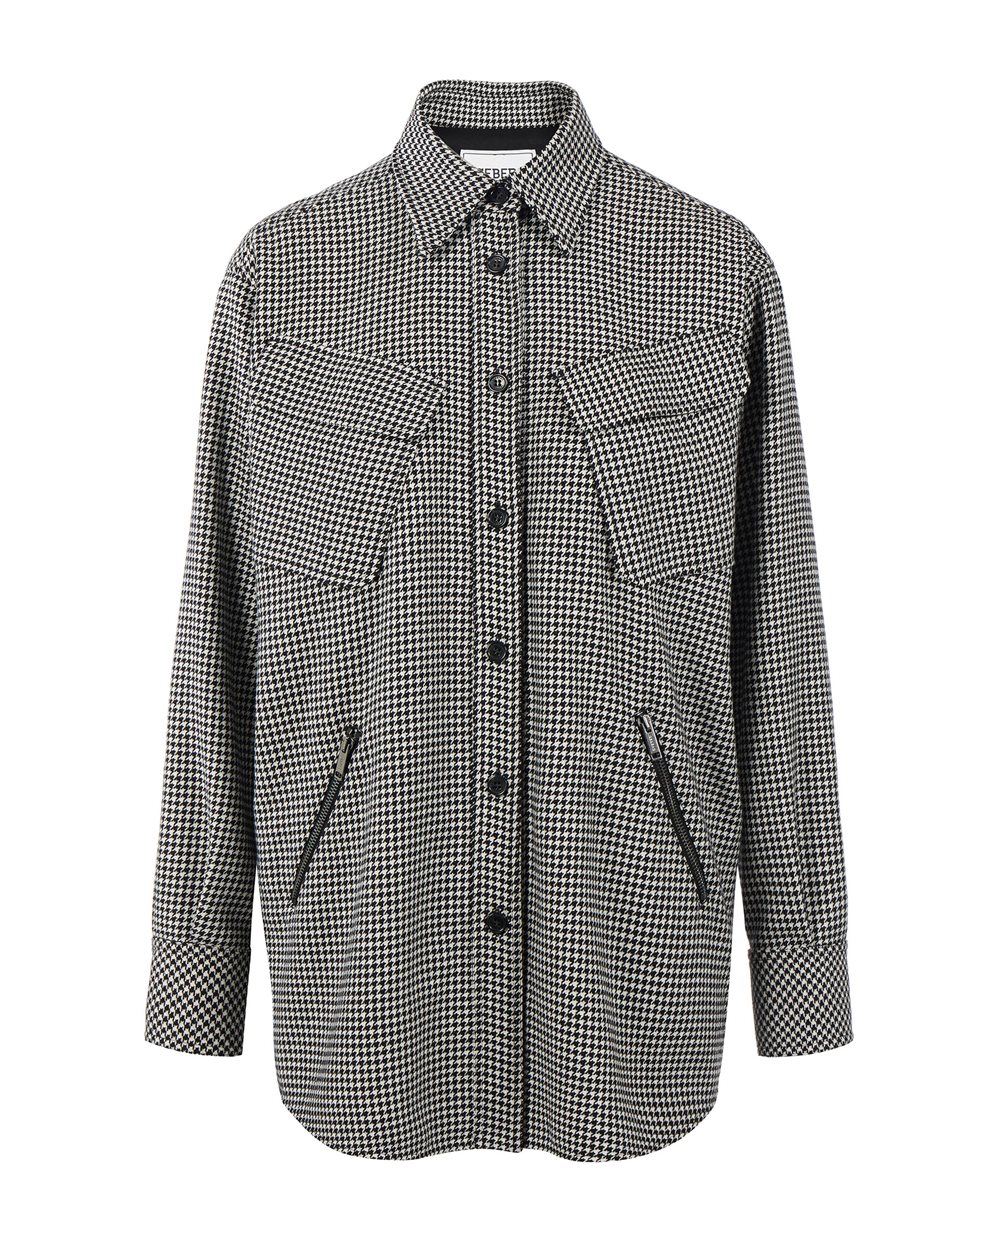 Shirt in pied de poule pattern - Clothing | Iceberg - Official Website